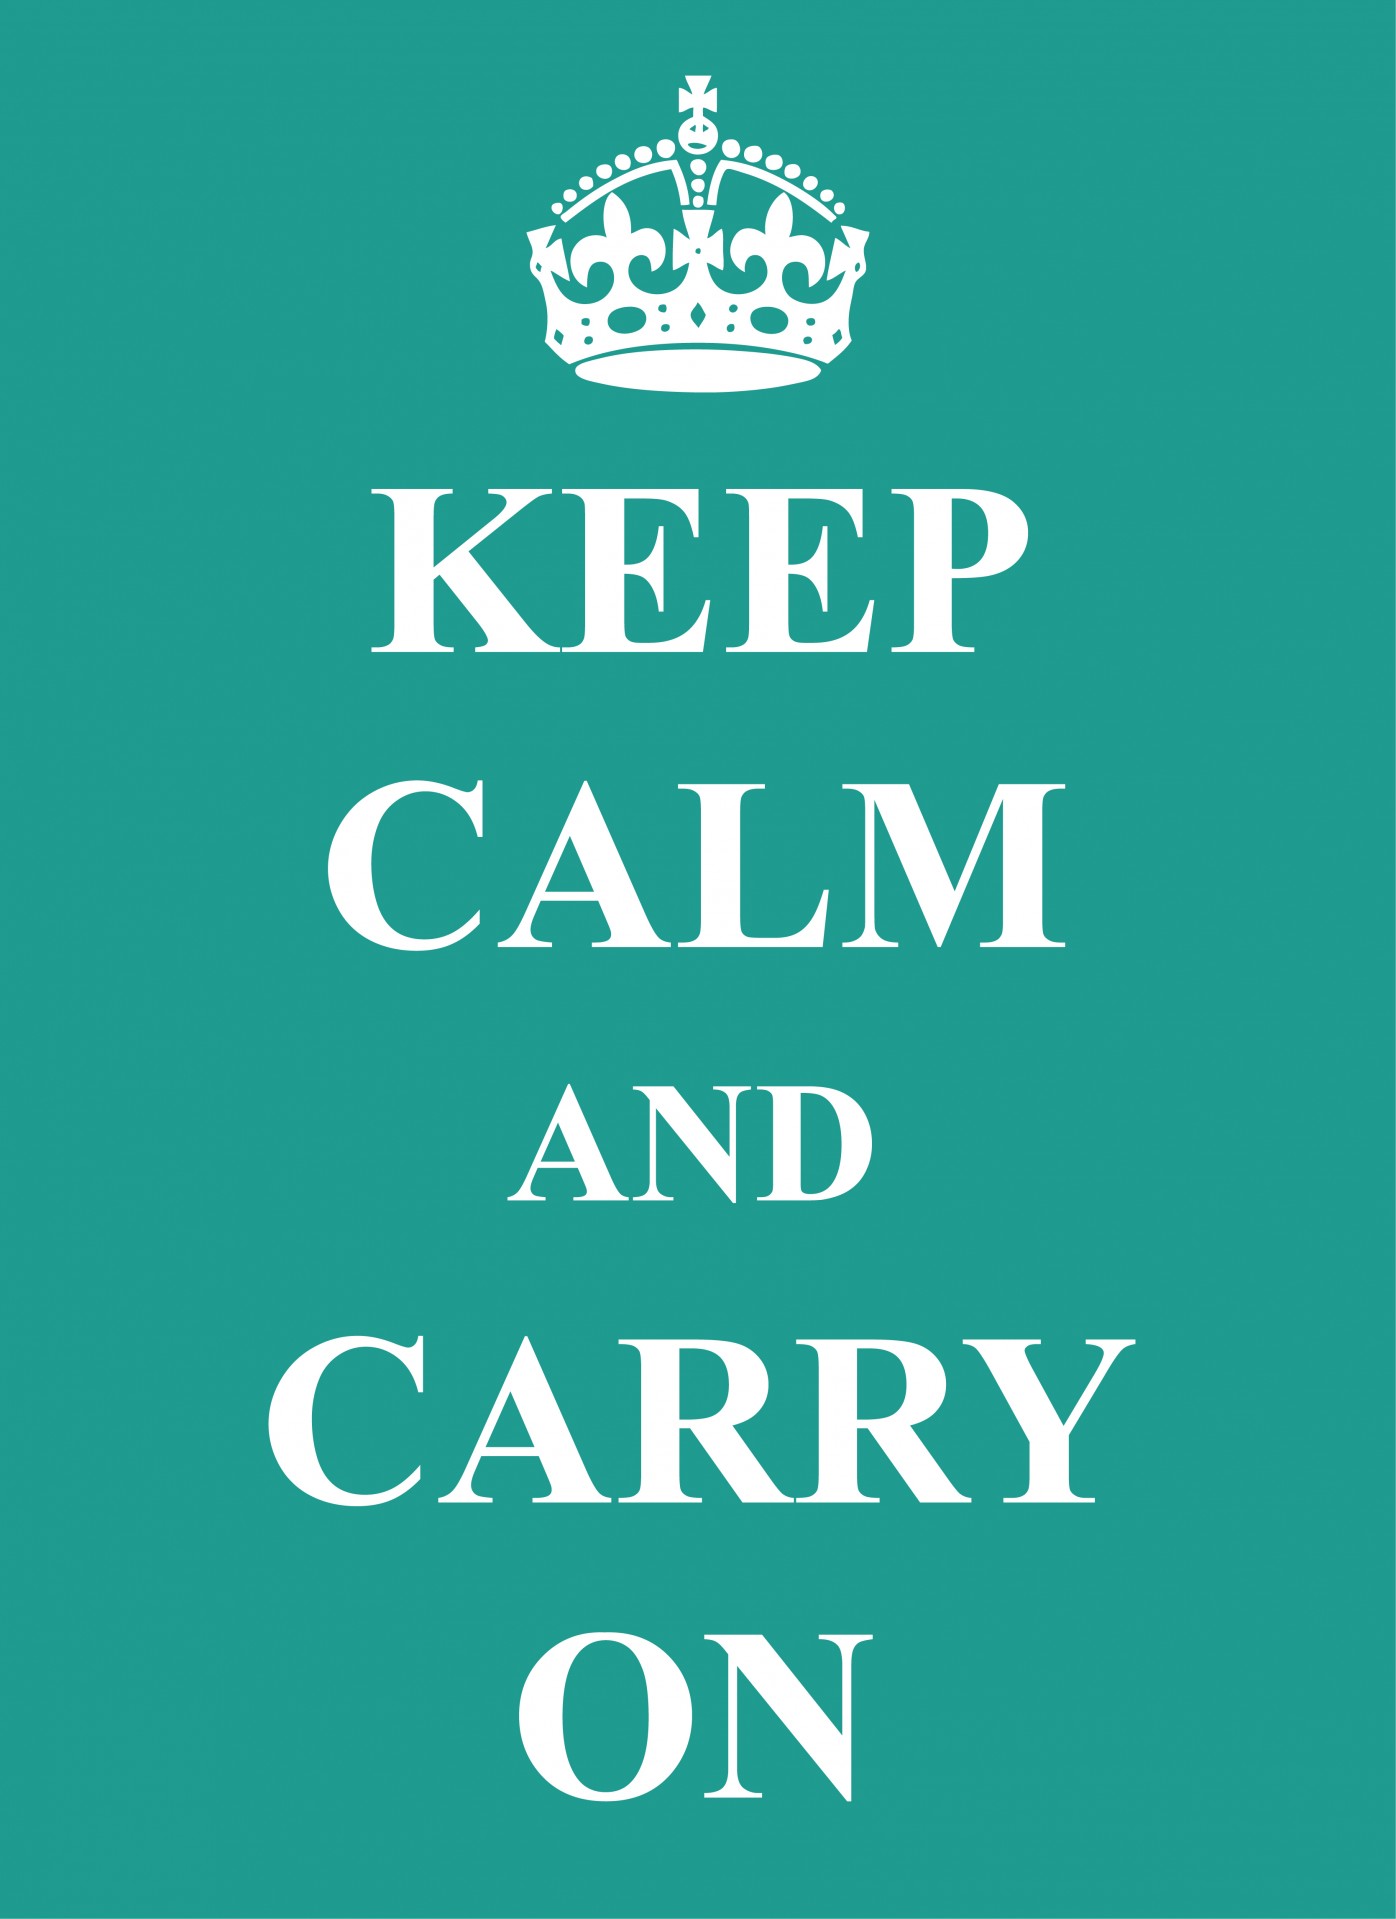 keep calm and carry on teal card free photo